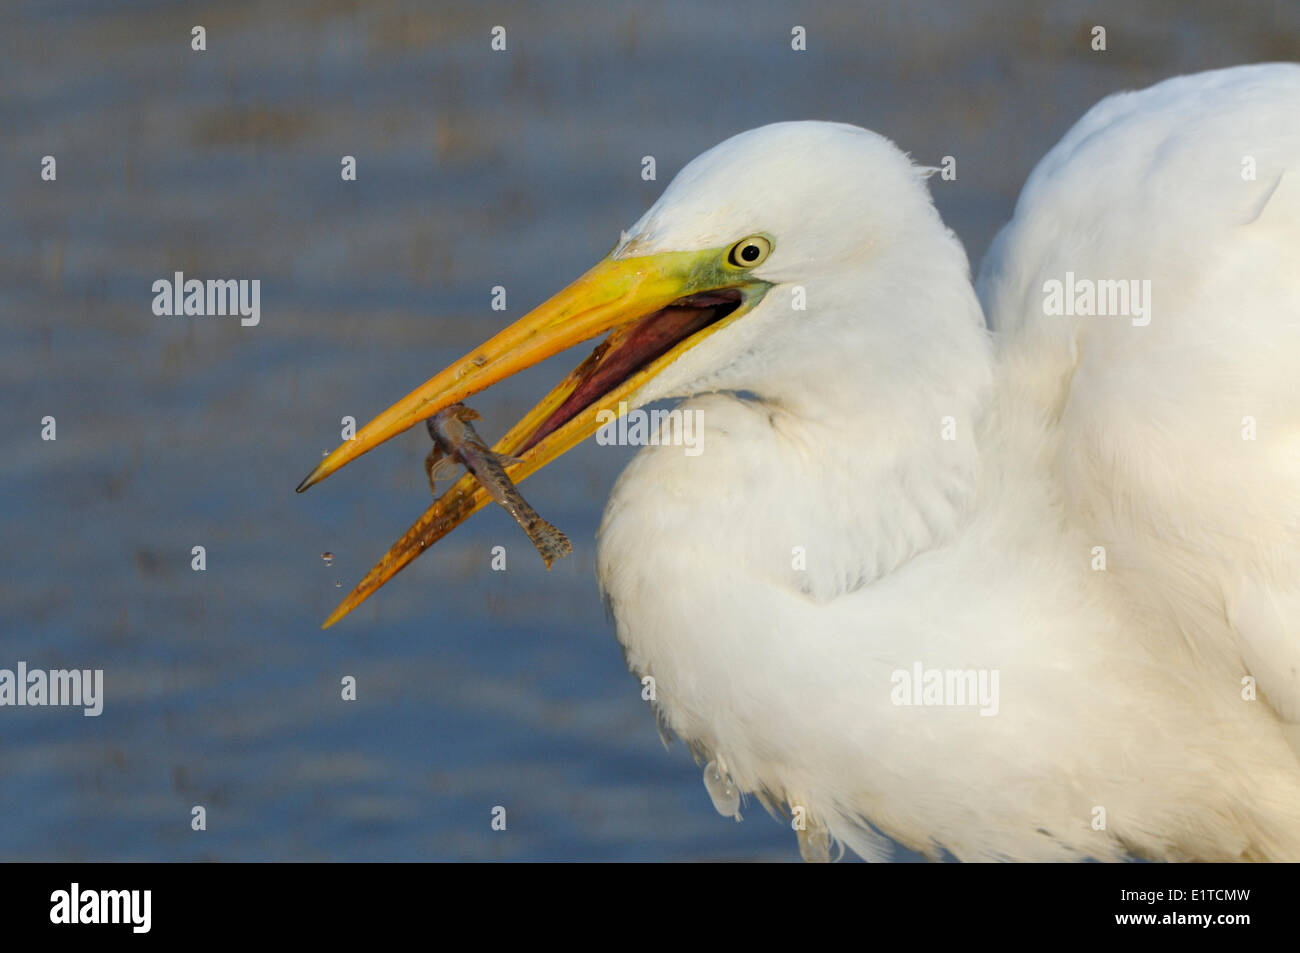 Headshot of a feeding Great White Egret. The prey is a Stone Loach Stock Photo